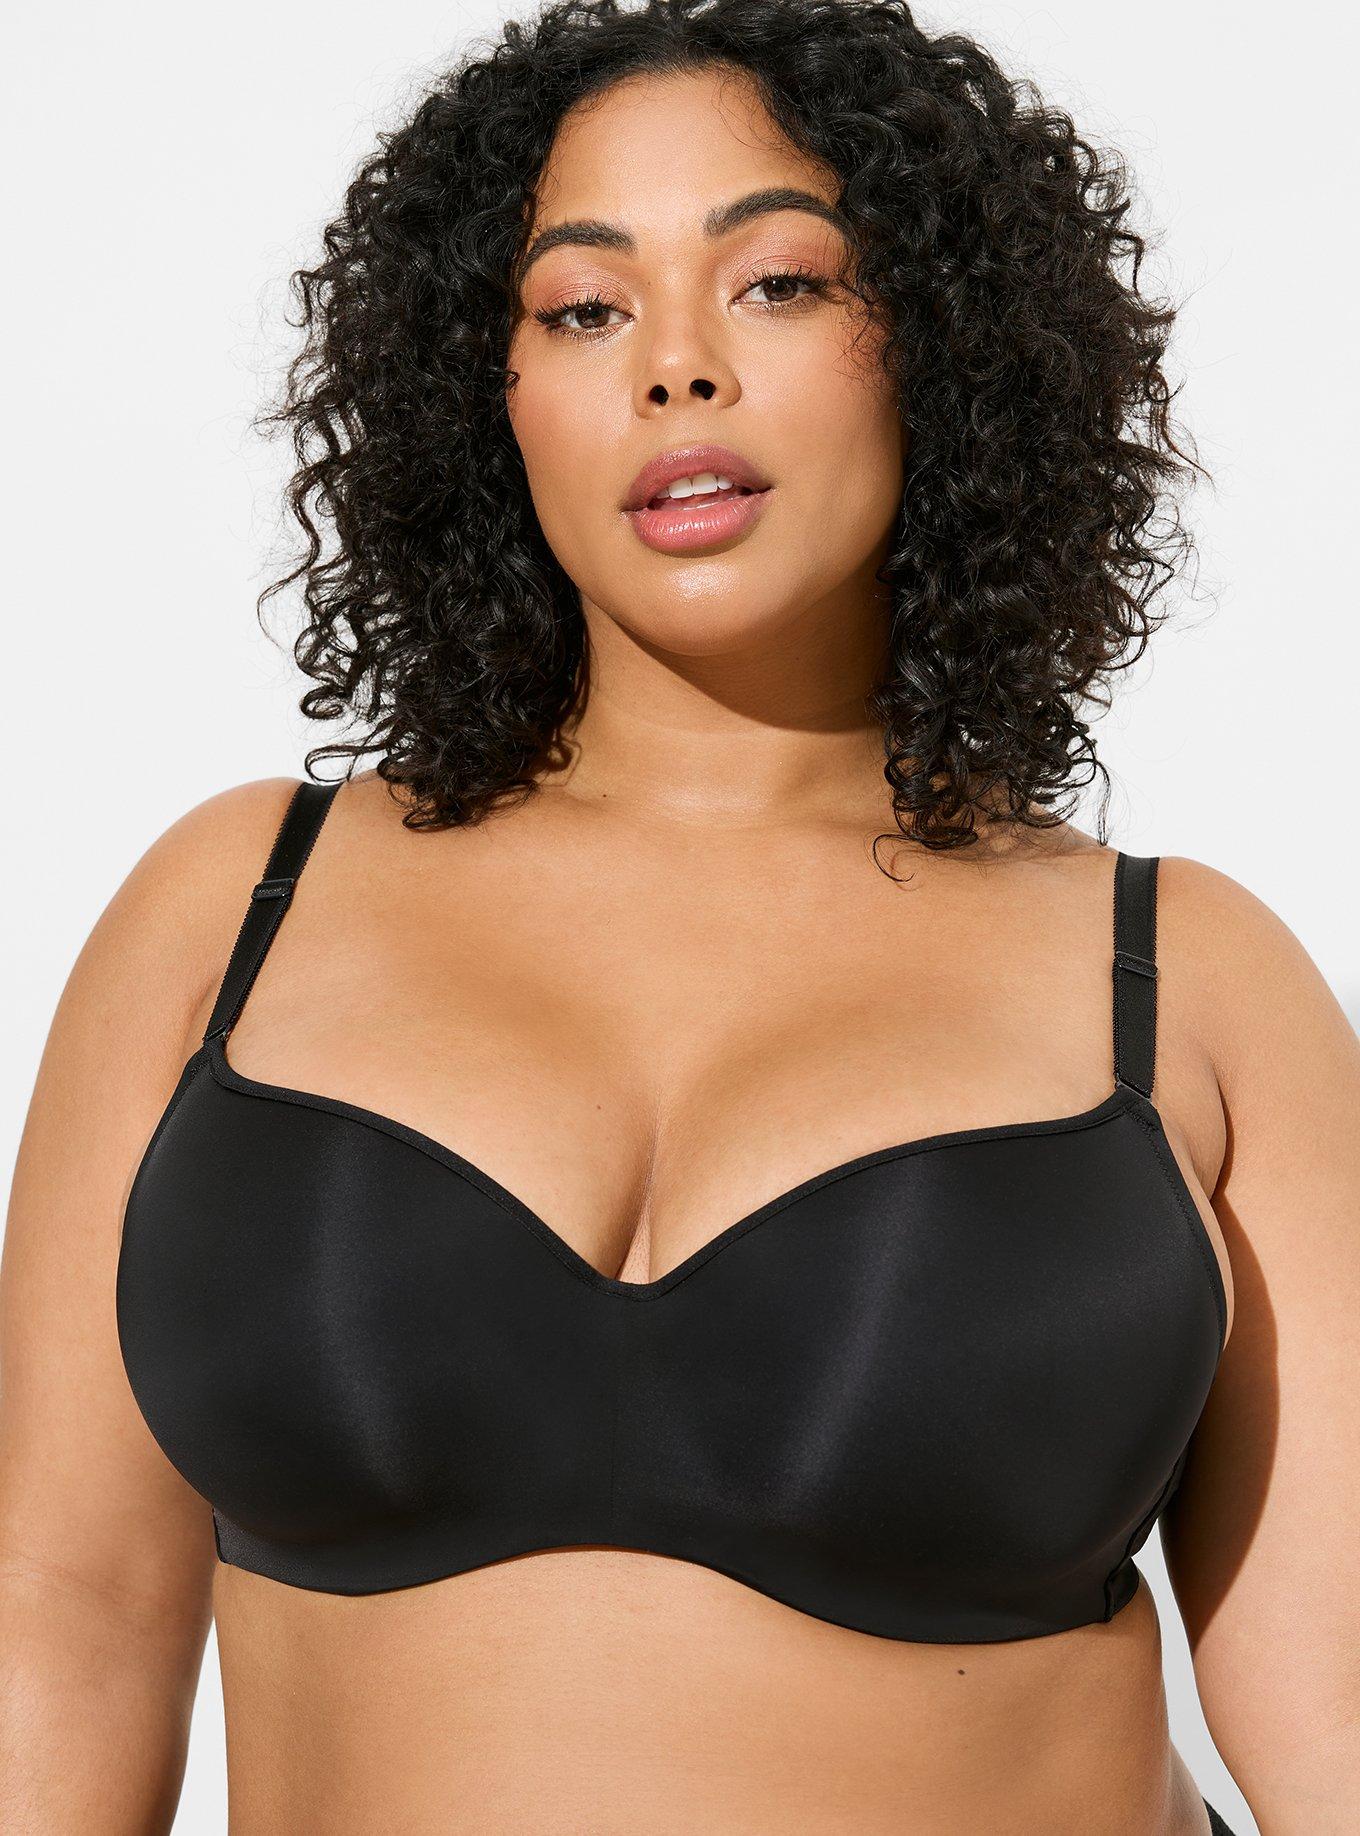 Torrid Curve Moon Stars Strapless Bra Size 46DD (No Straps Included)